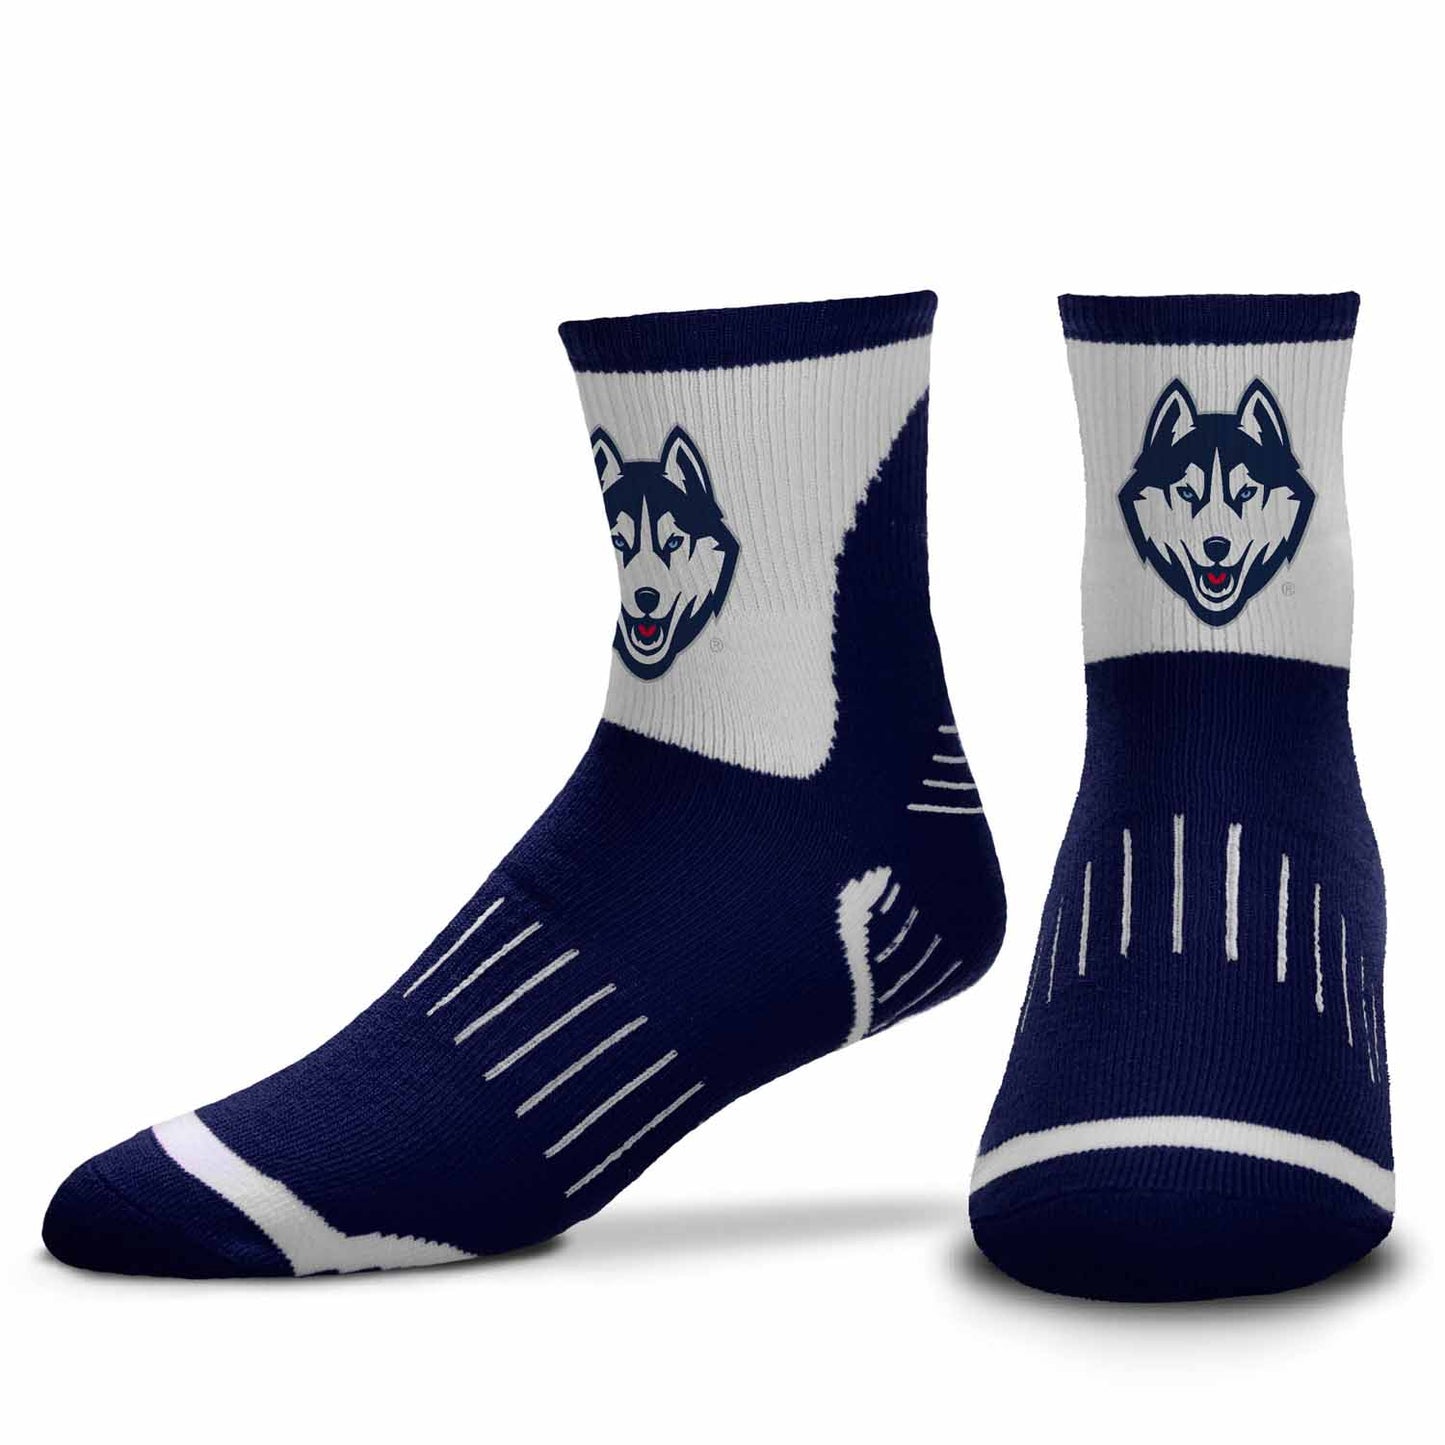 UCONN Huskies Youth Surge Crew Socks Sports Fan For Boys and Girls with Logo - Navy